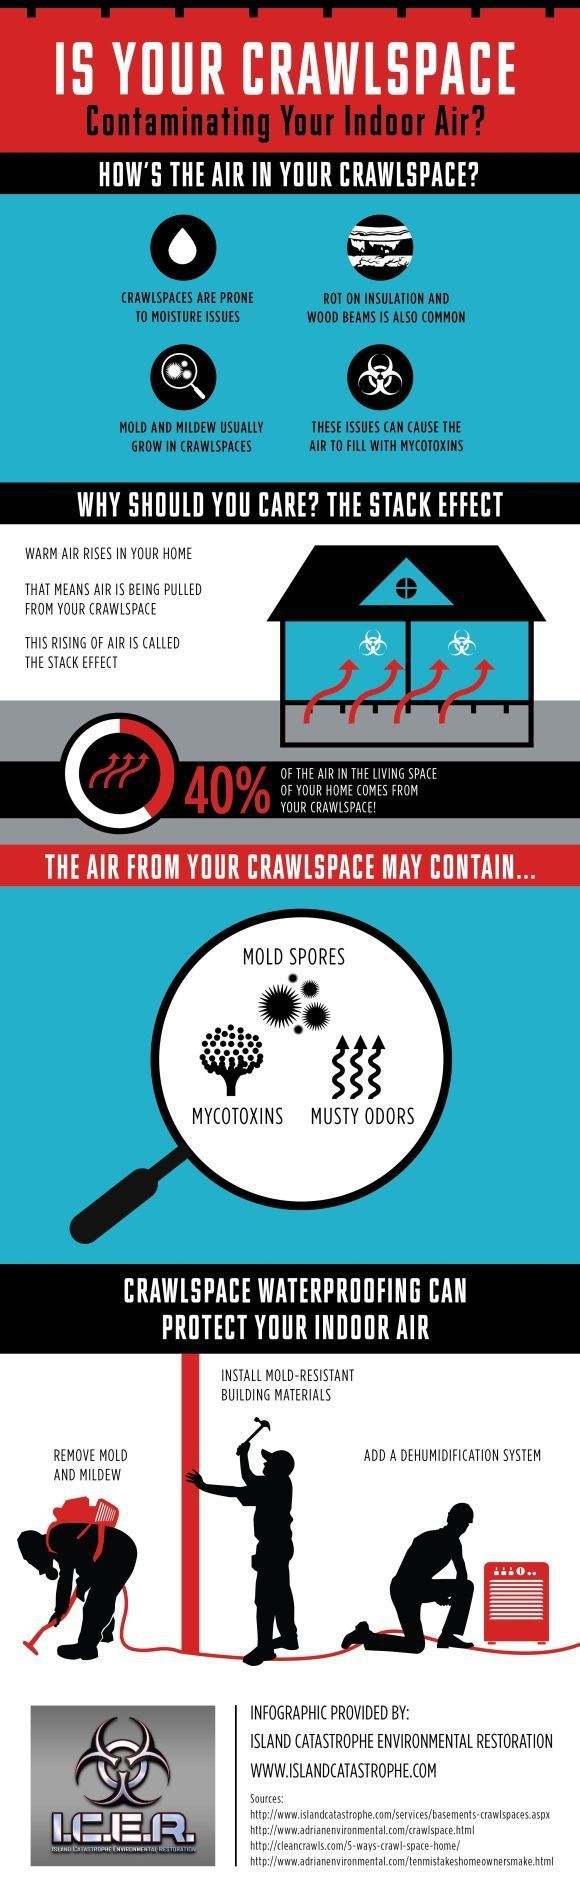 Why Does Mold Grow In Your Crawlspace Summary!